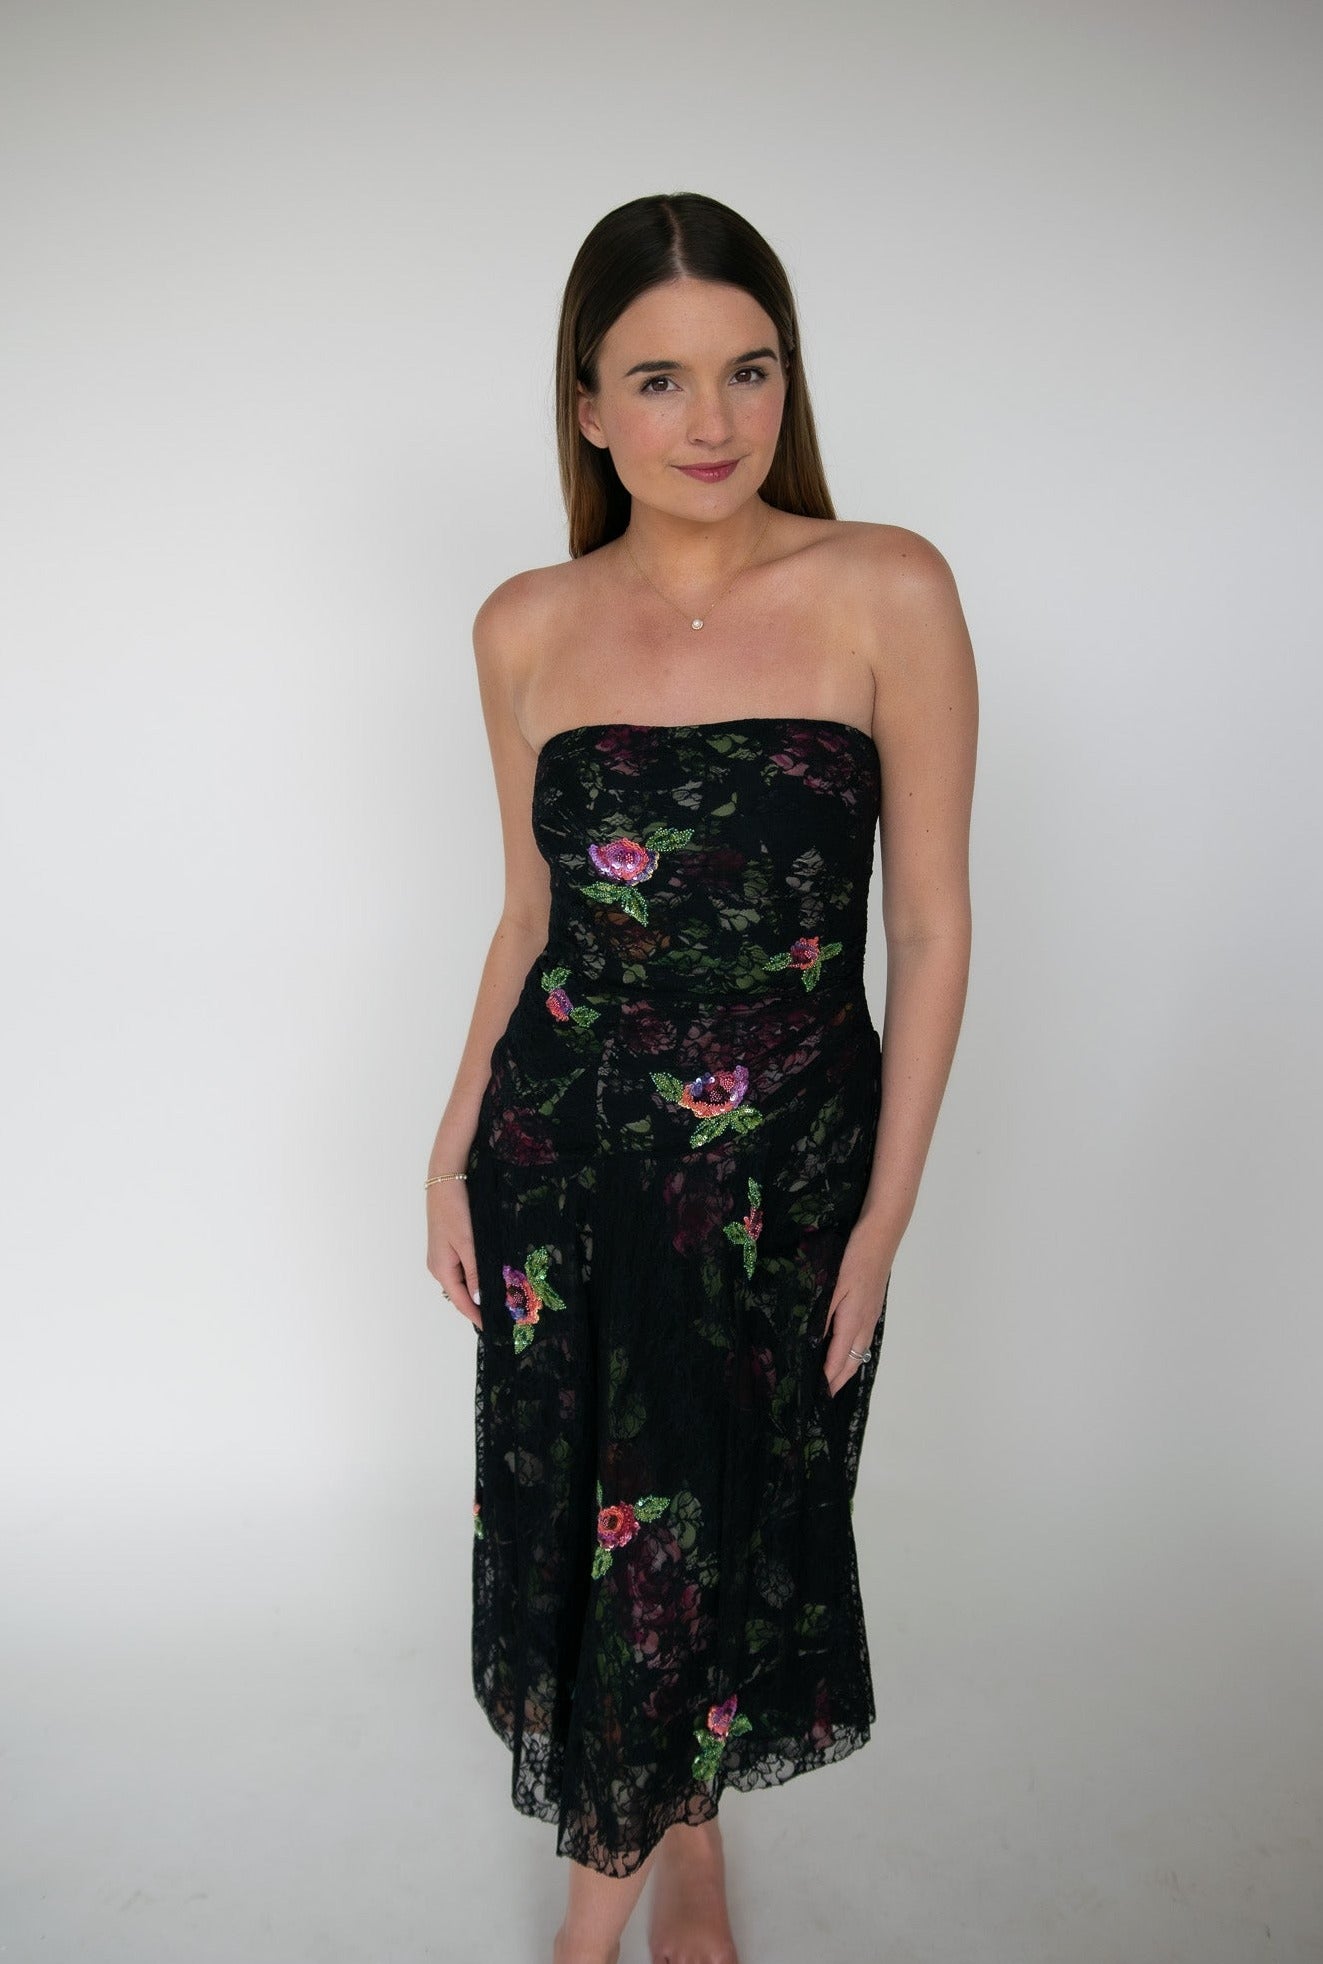 Nicole Miller strapless Lace and Sequin Maxi